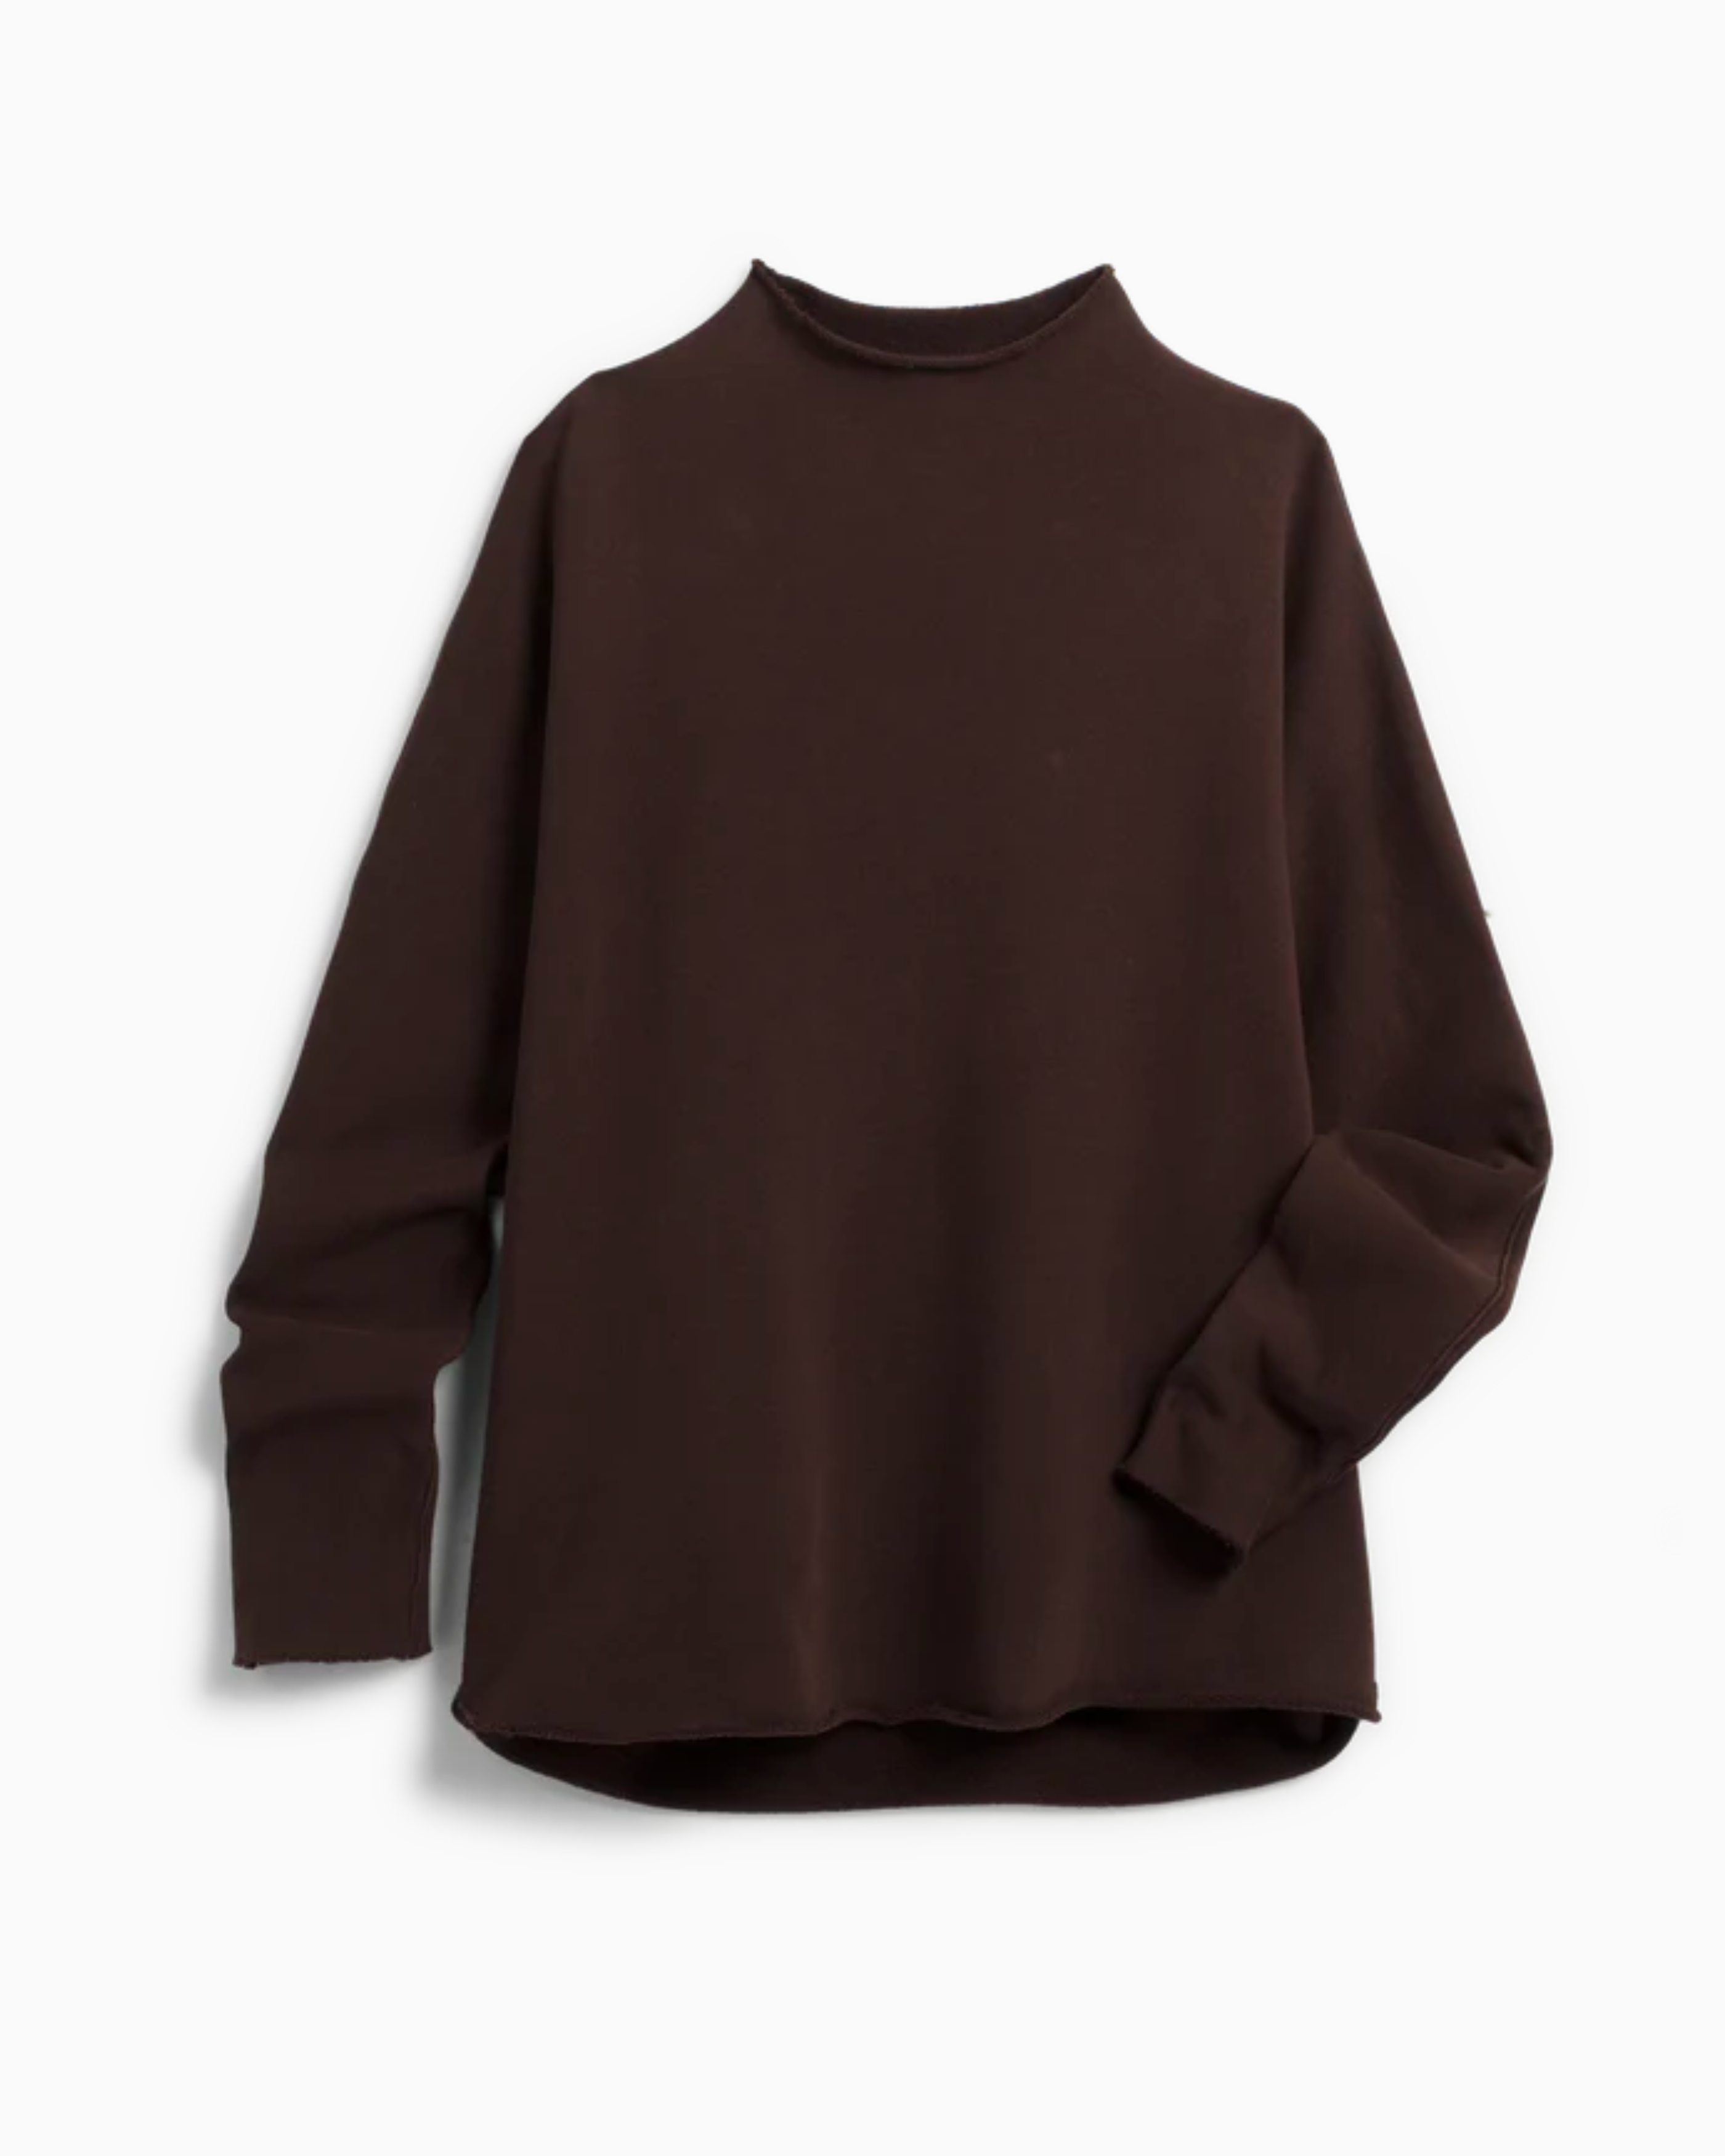 Frank and Eileen Effie Funnel Neck Capelet in Irish Chocolate